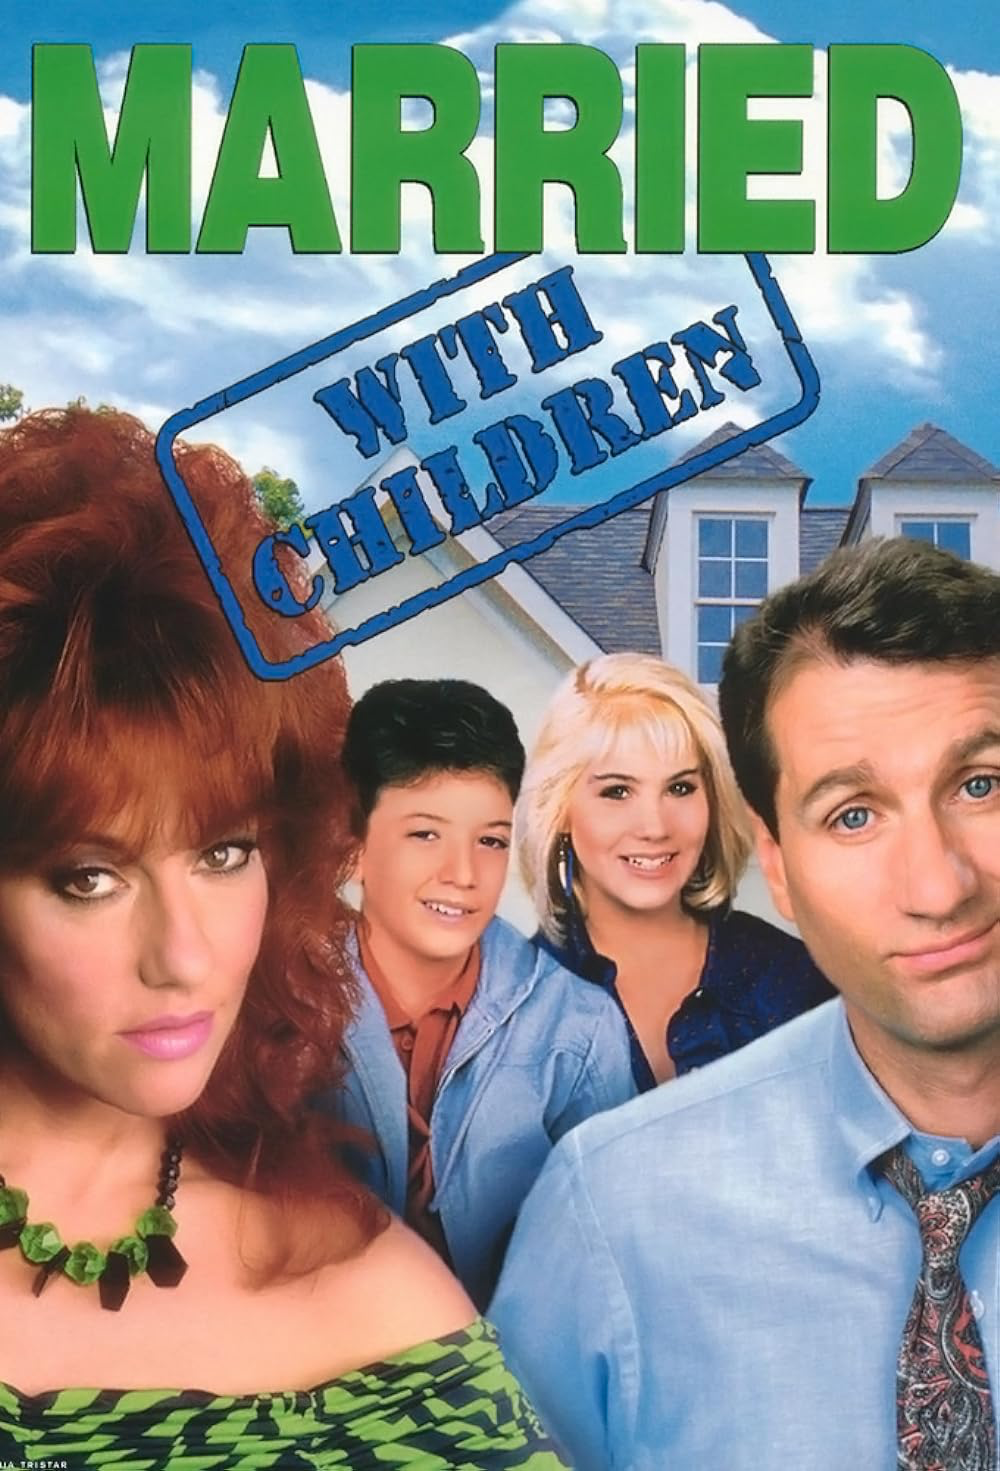 Married with Children (TV Series 1987–1997) - “Cast” credits - IMDb